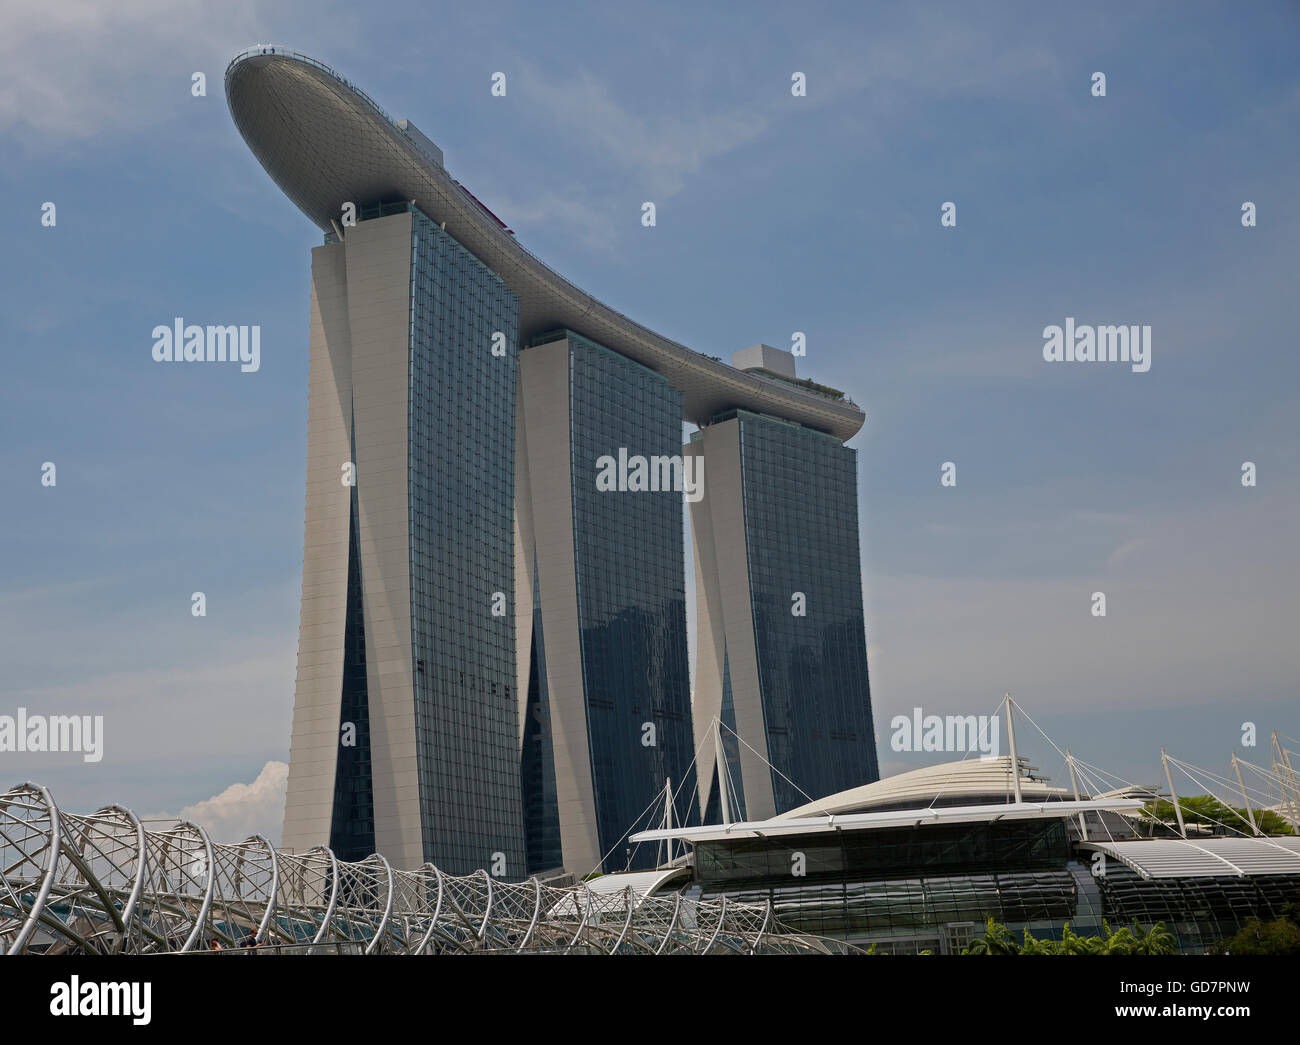 a view of the marina bay sands hotel in dubai uae, the